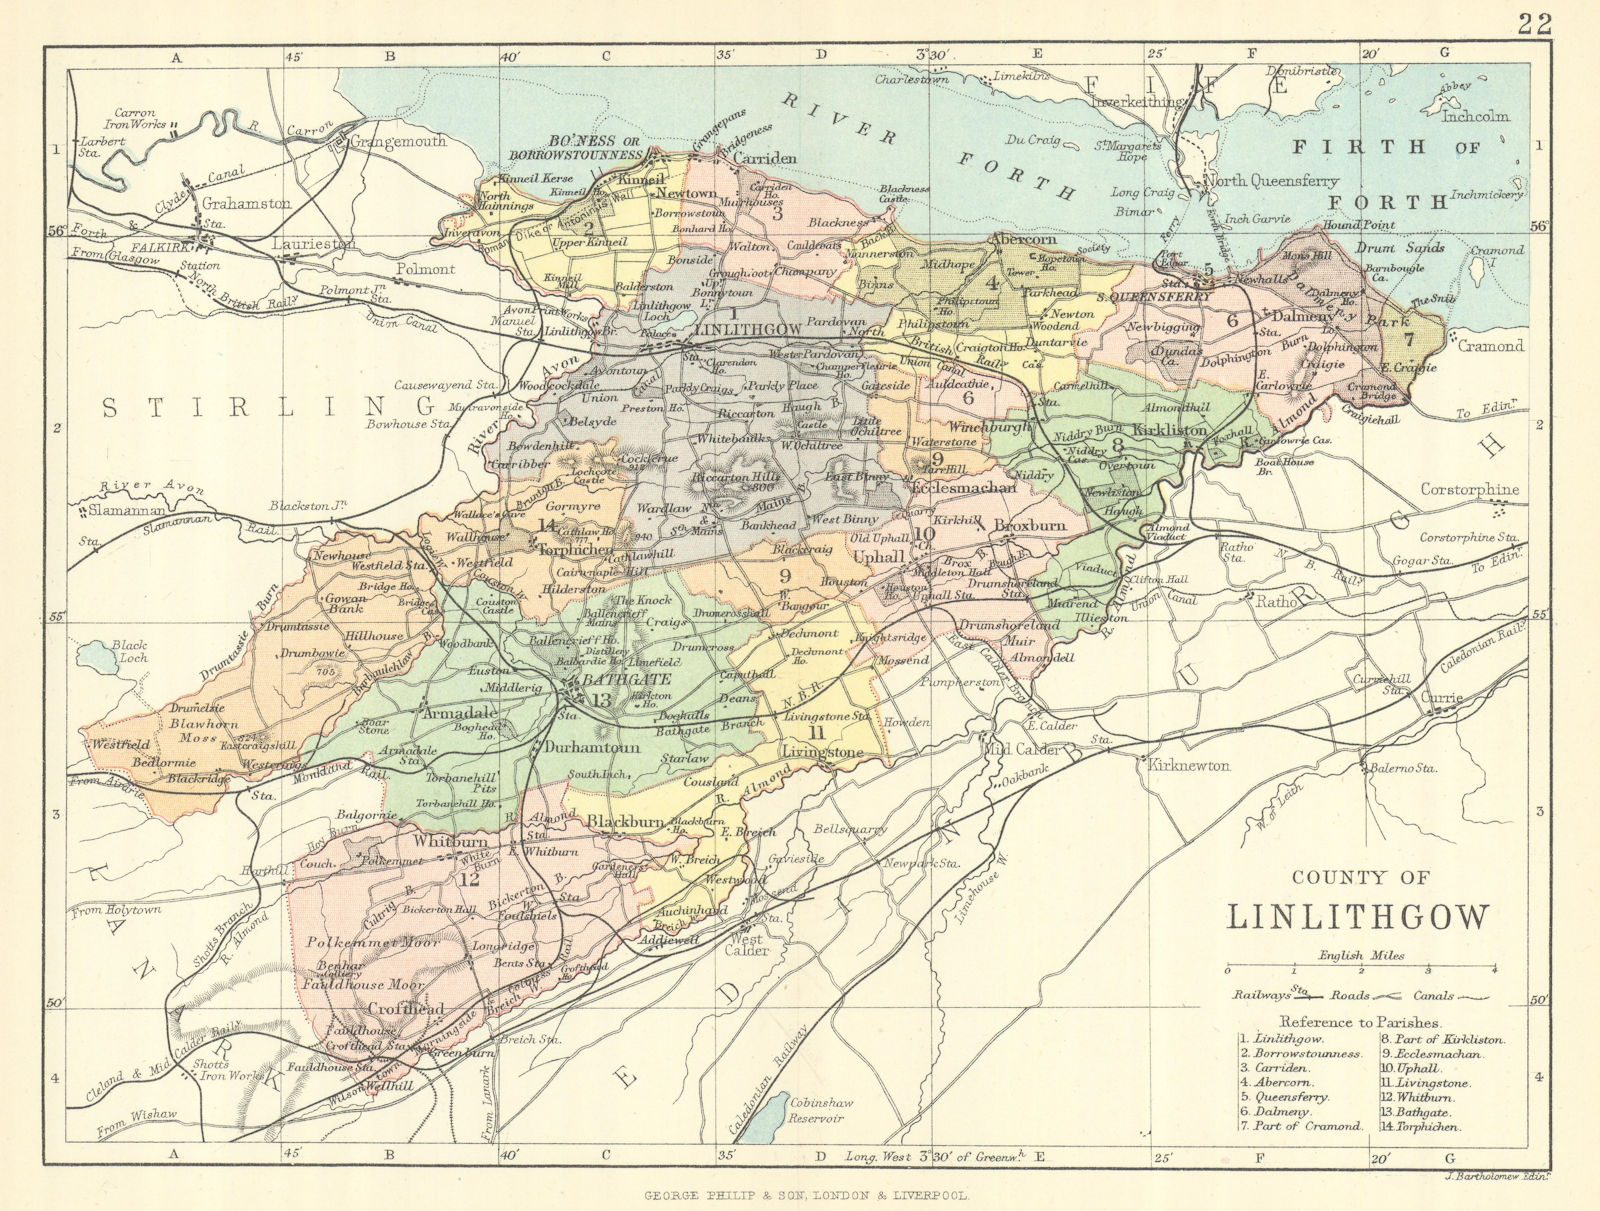 'County of Linlithgow'. Linlithgowshire. Parishes. BARTHOLOMEW 1888 old map